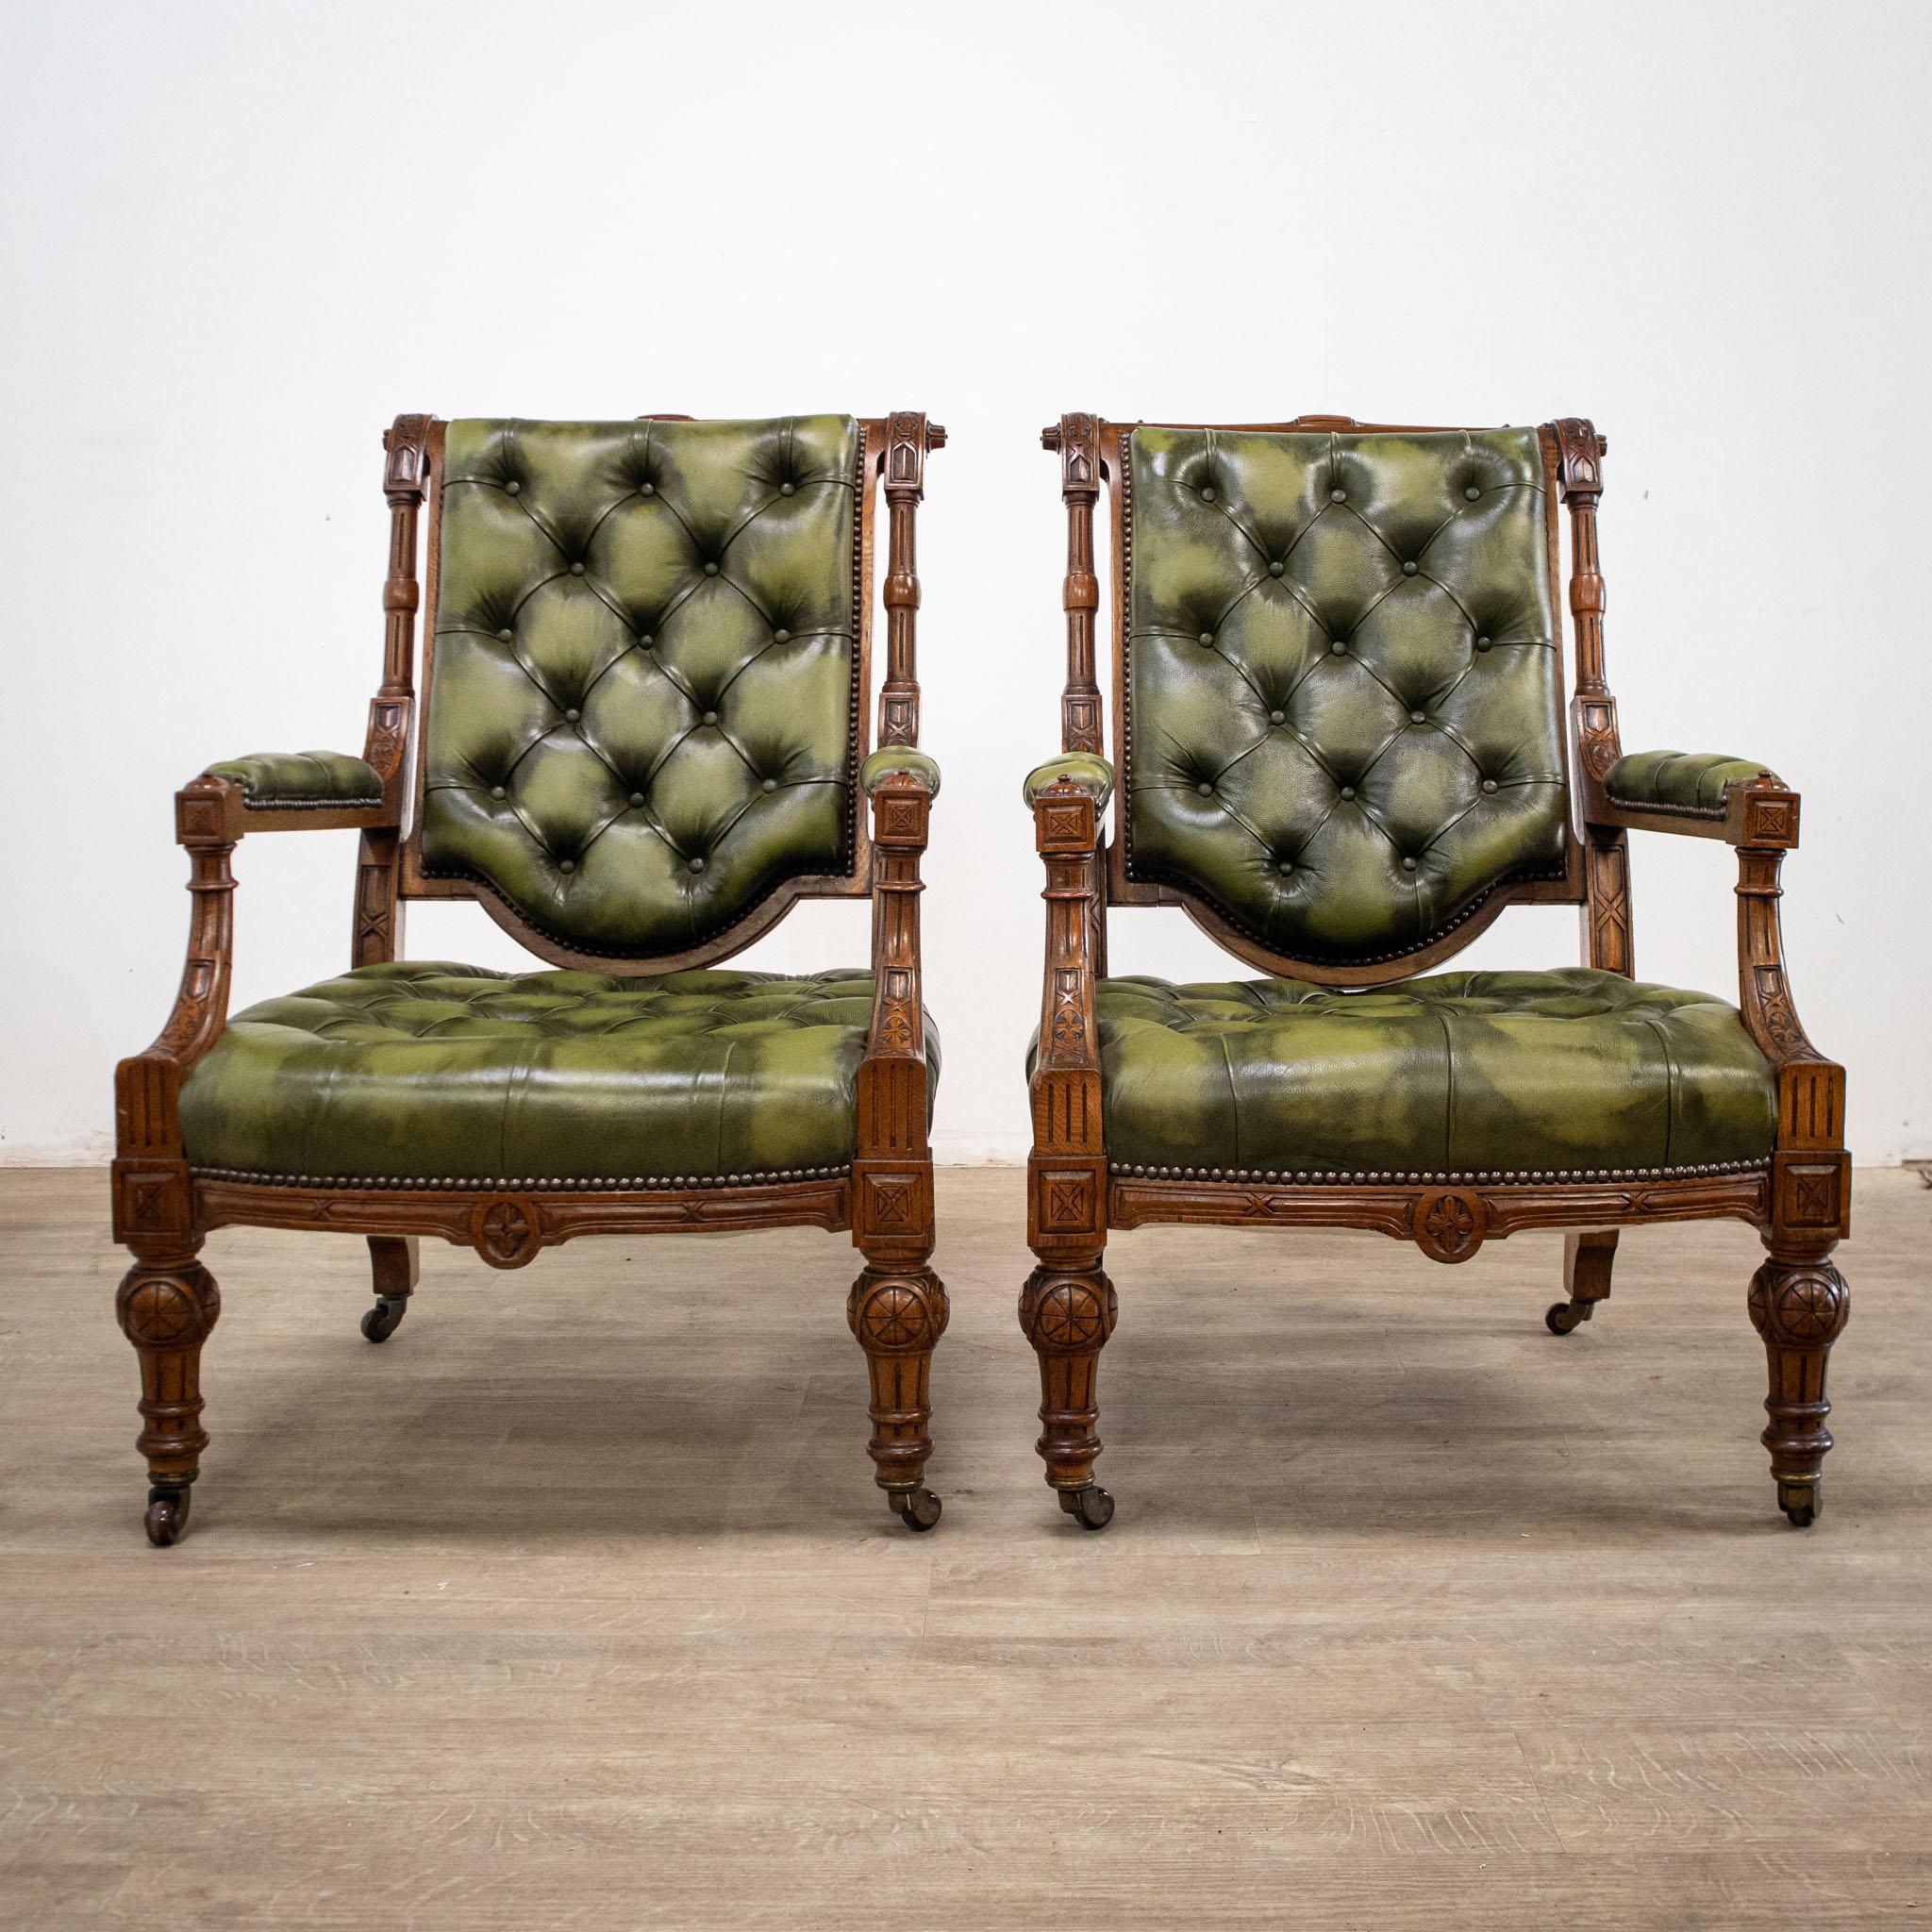 A pair of wonderful early Victorian library chairs upholstered in green leather, with buttoned backs and seats.
- Leather in good condition, without cracks or significant wear.
- Brown ceramic castors.
- Deep, low seats.
- Attractively carved